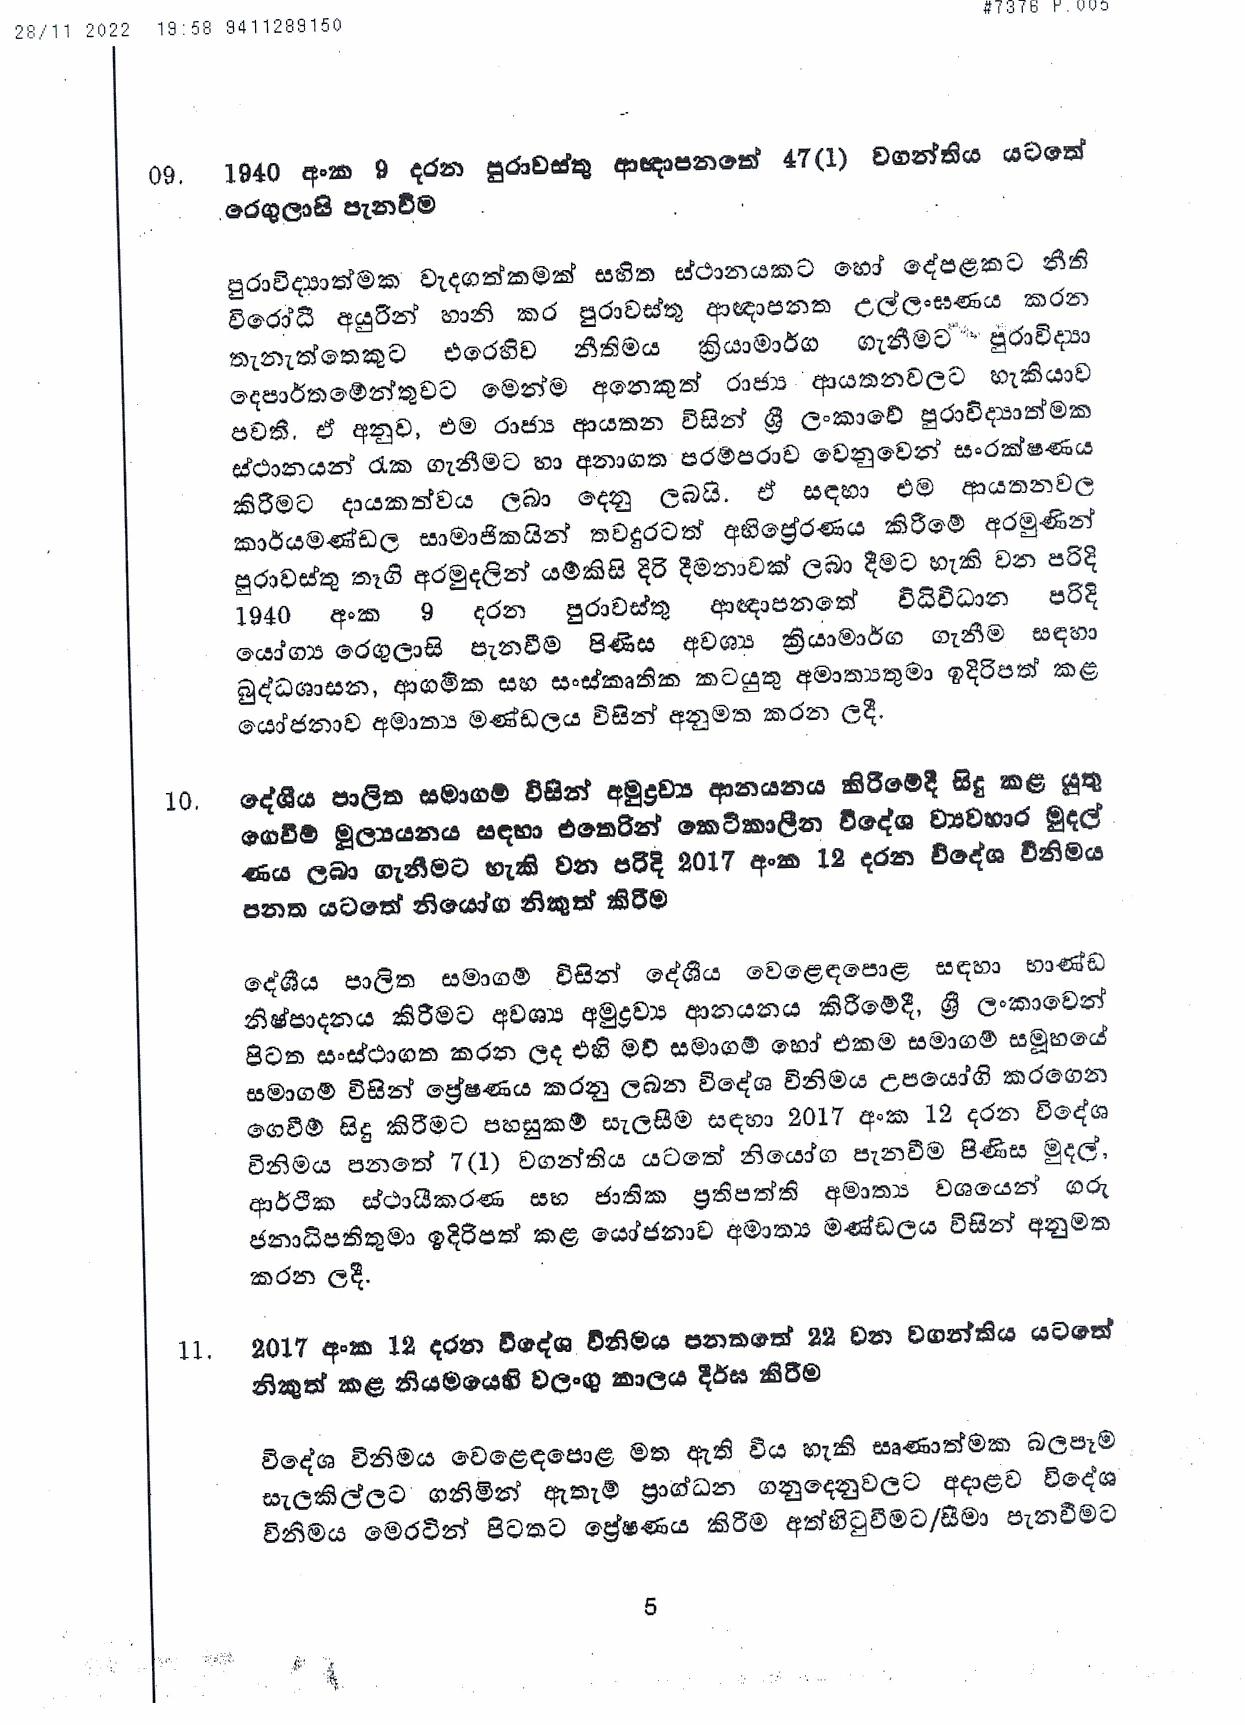 Cabinet Decision on 28.11.2022 page 005